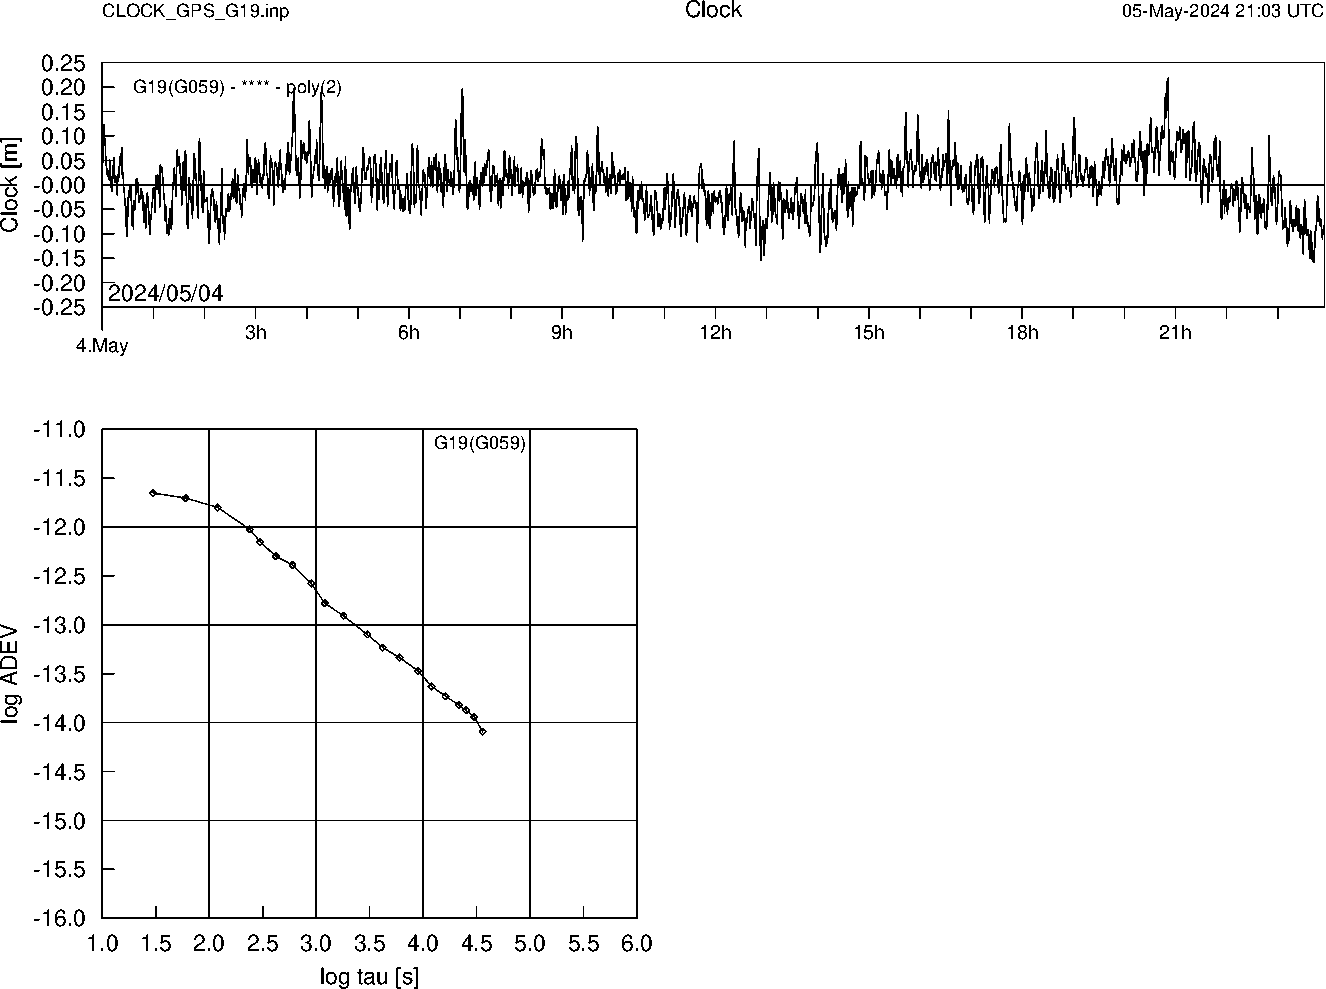 GPS G19 Clock Time Series and Allan Deviation